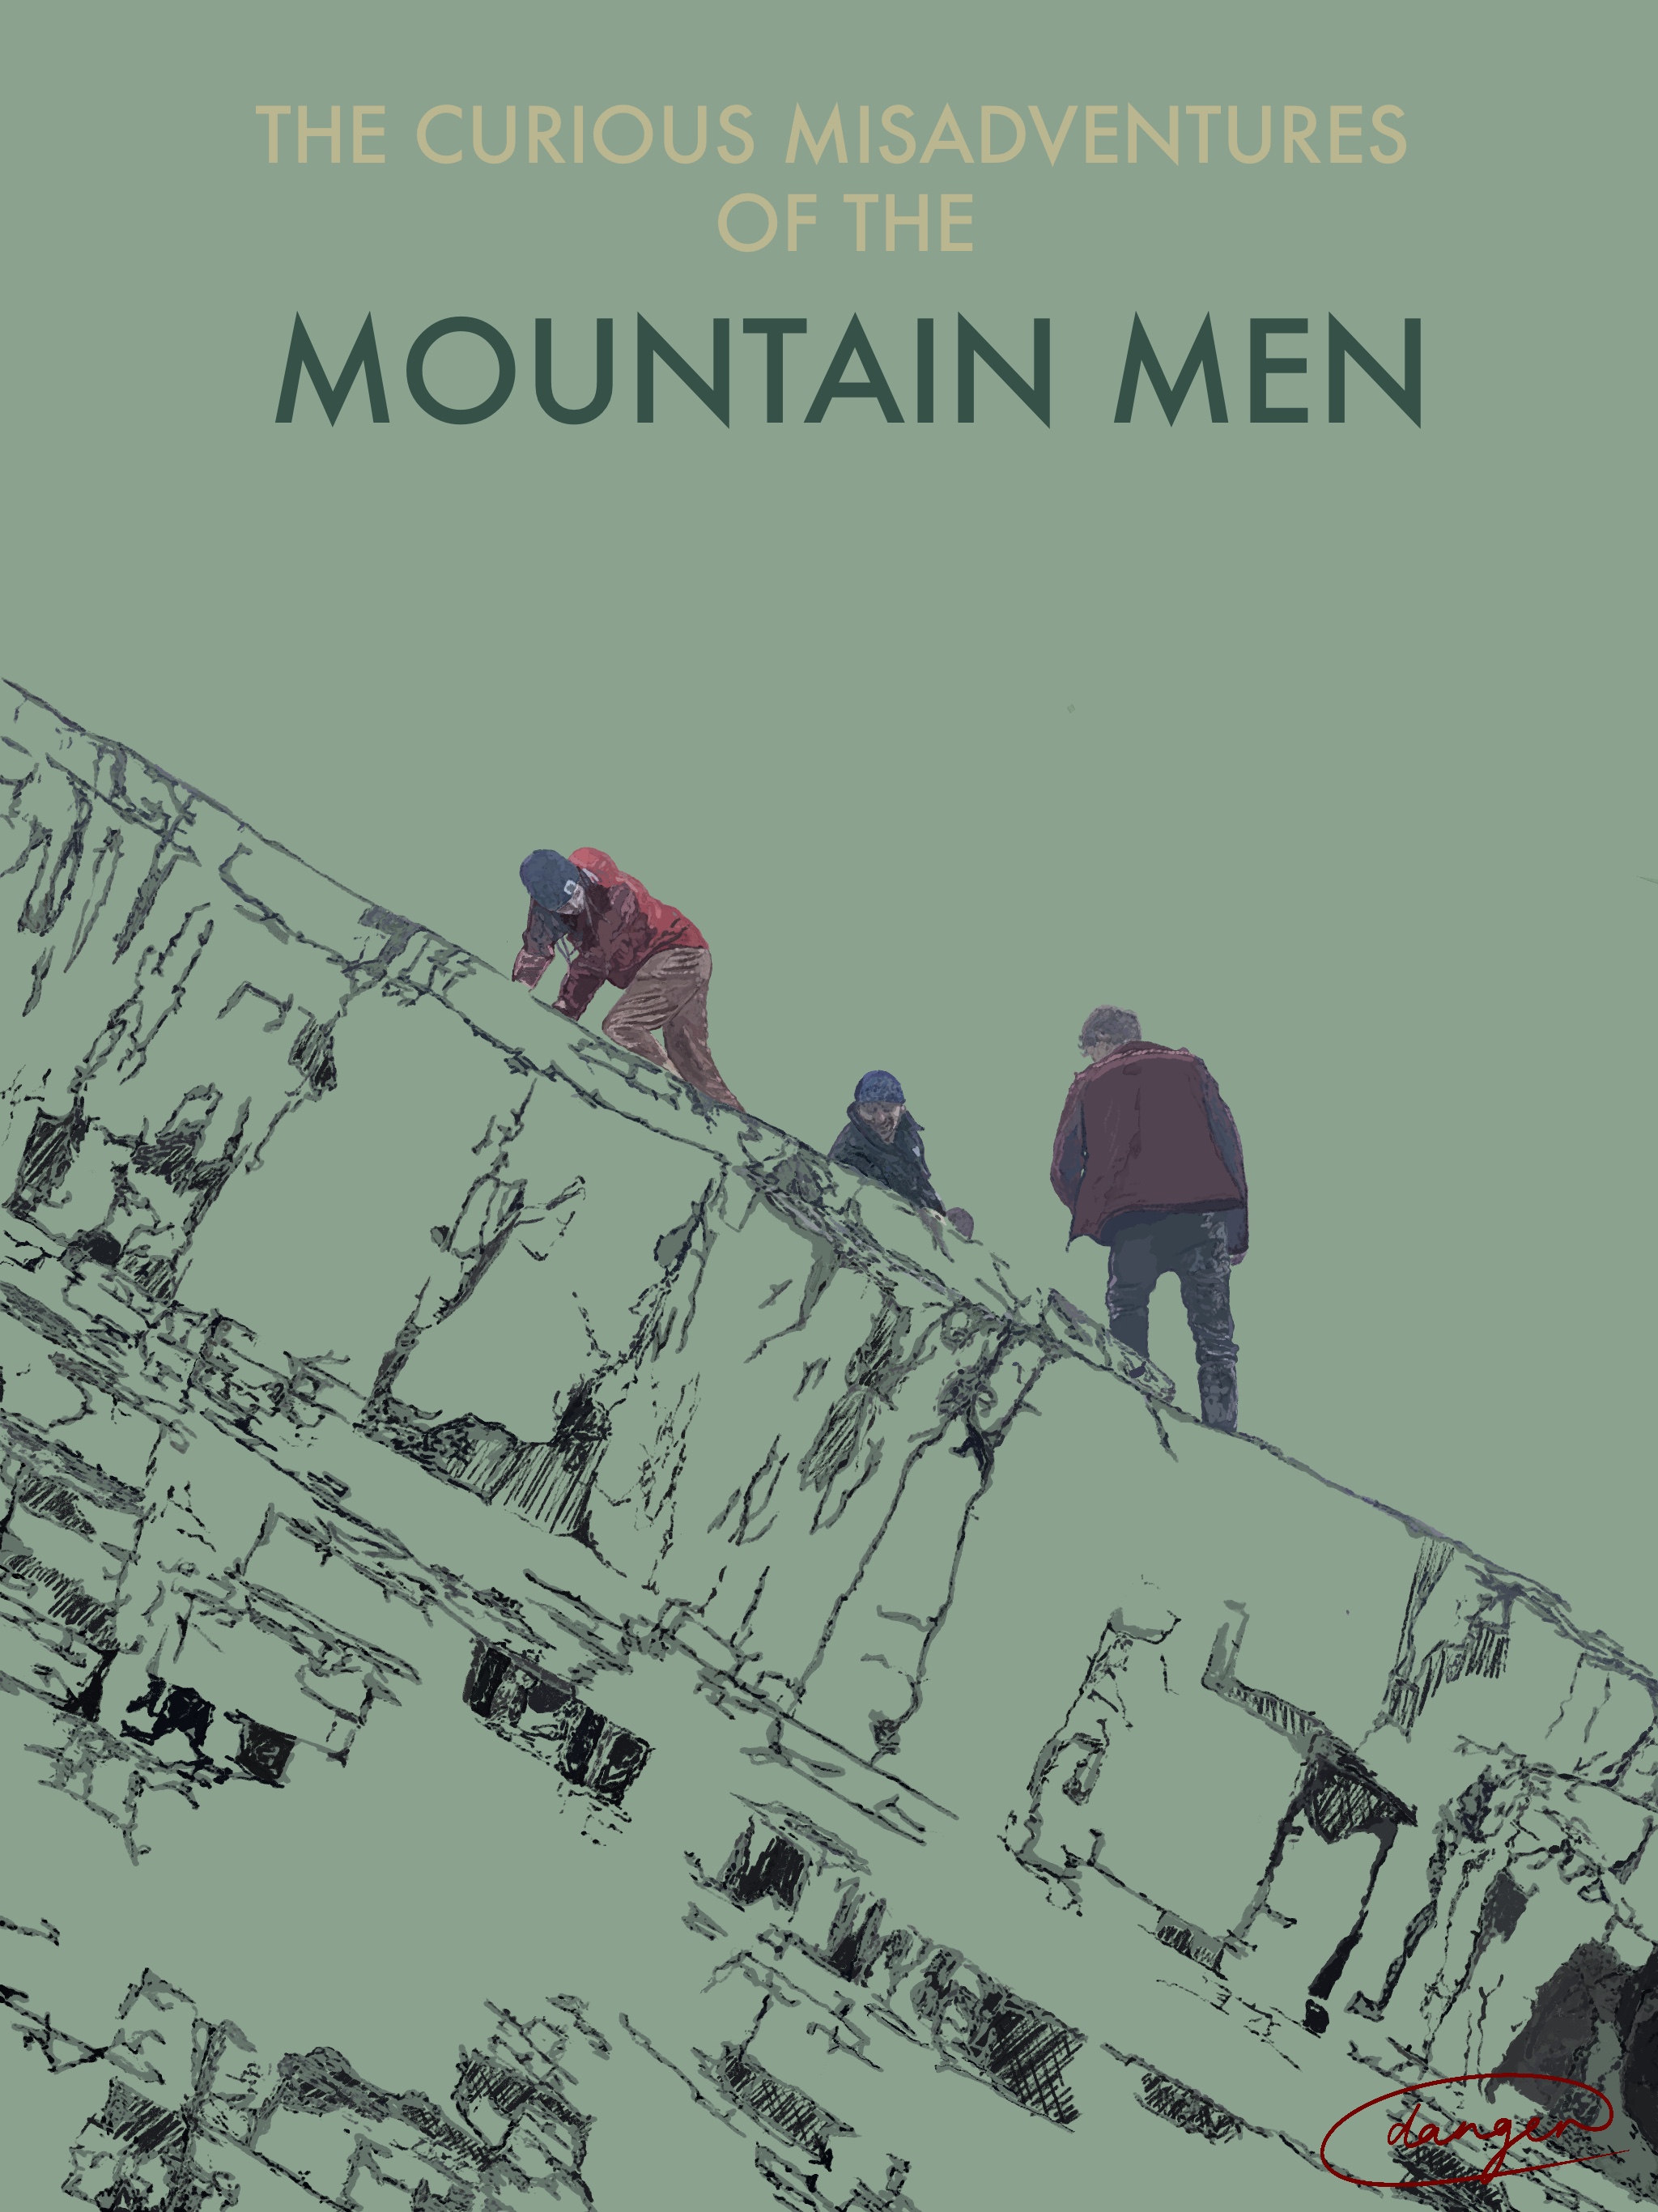 Movie poster style drawing of three men on a mountain.